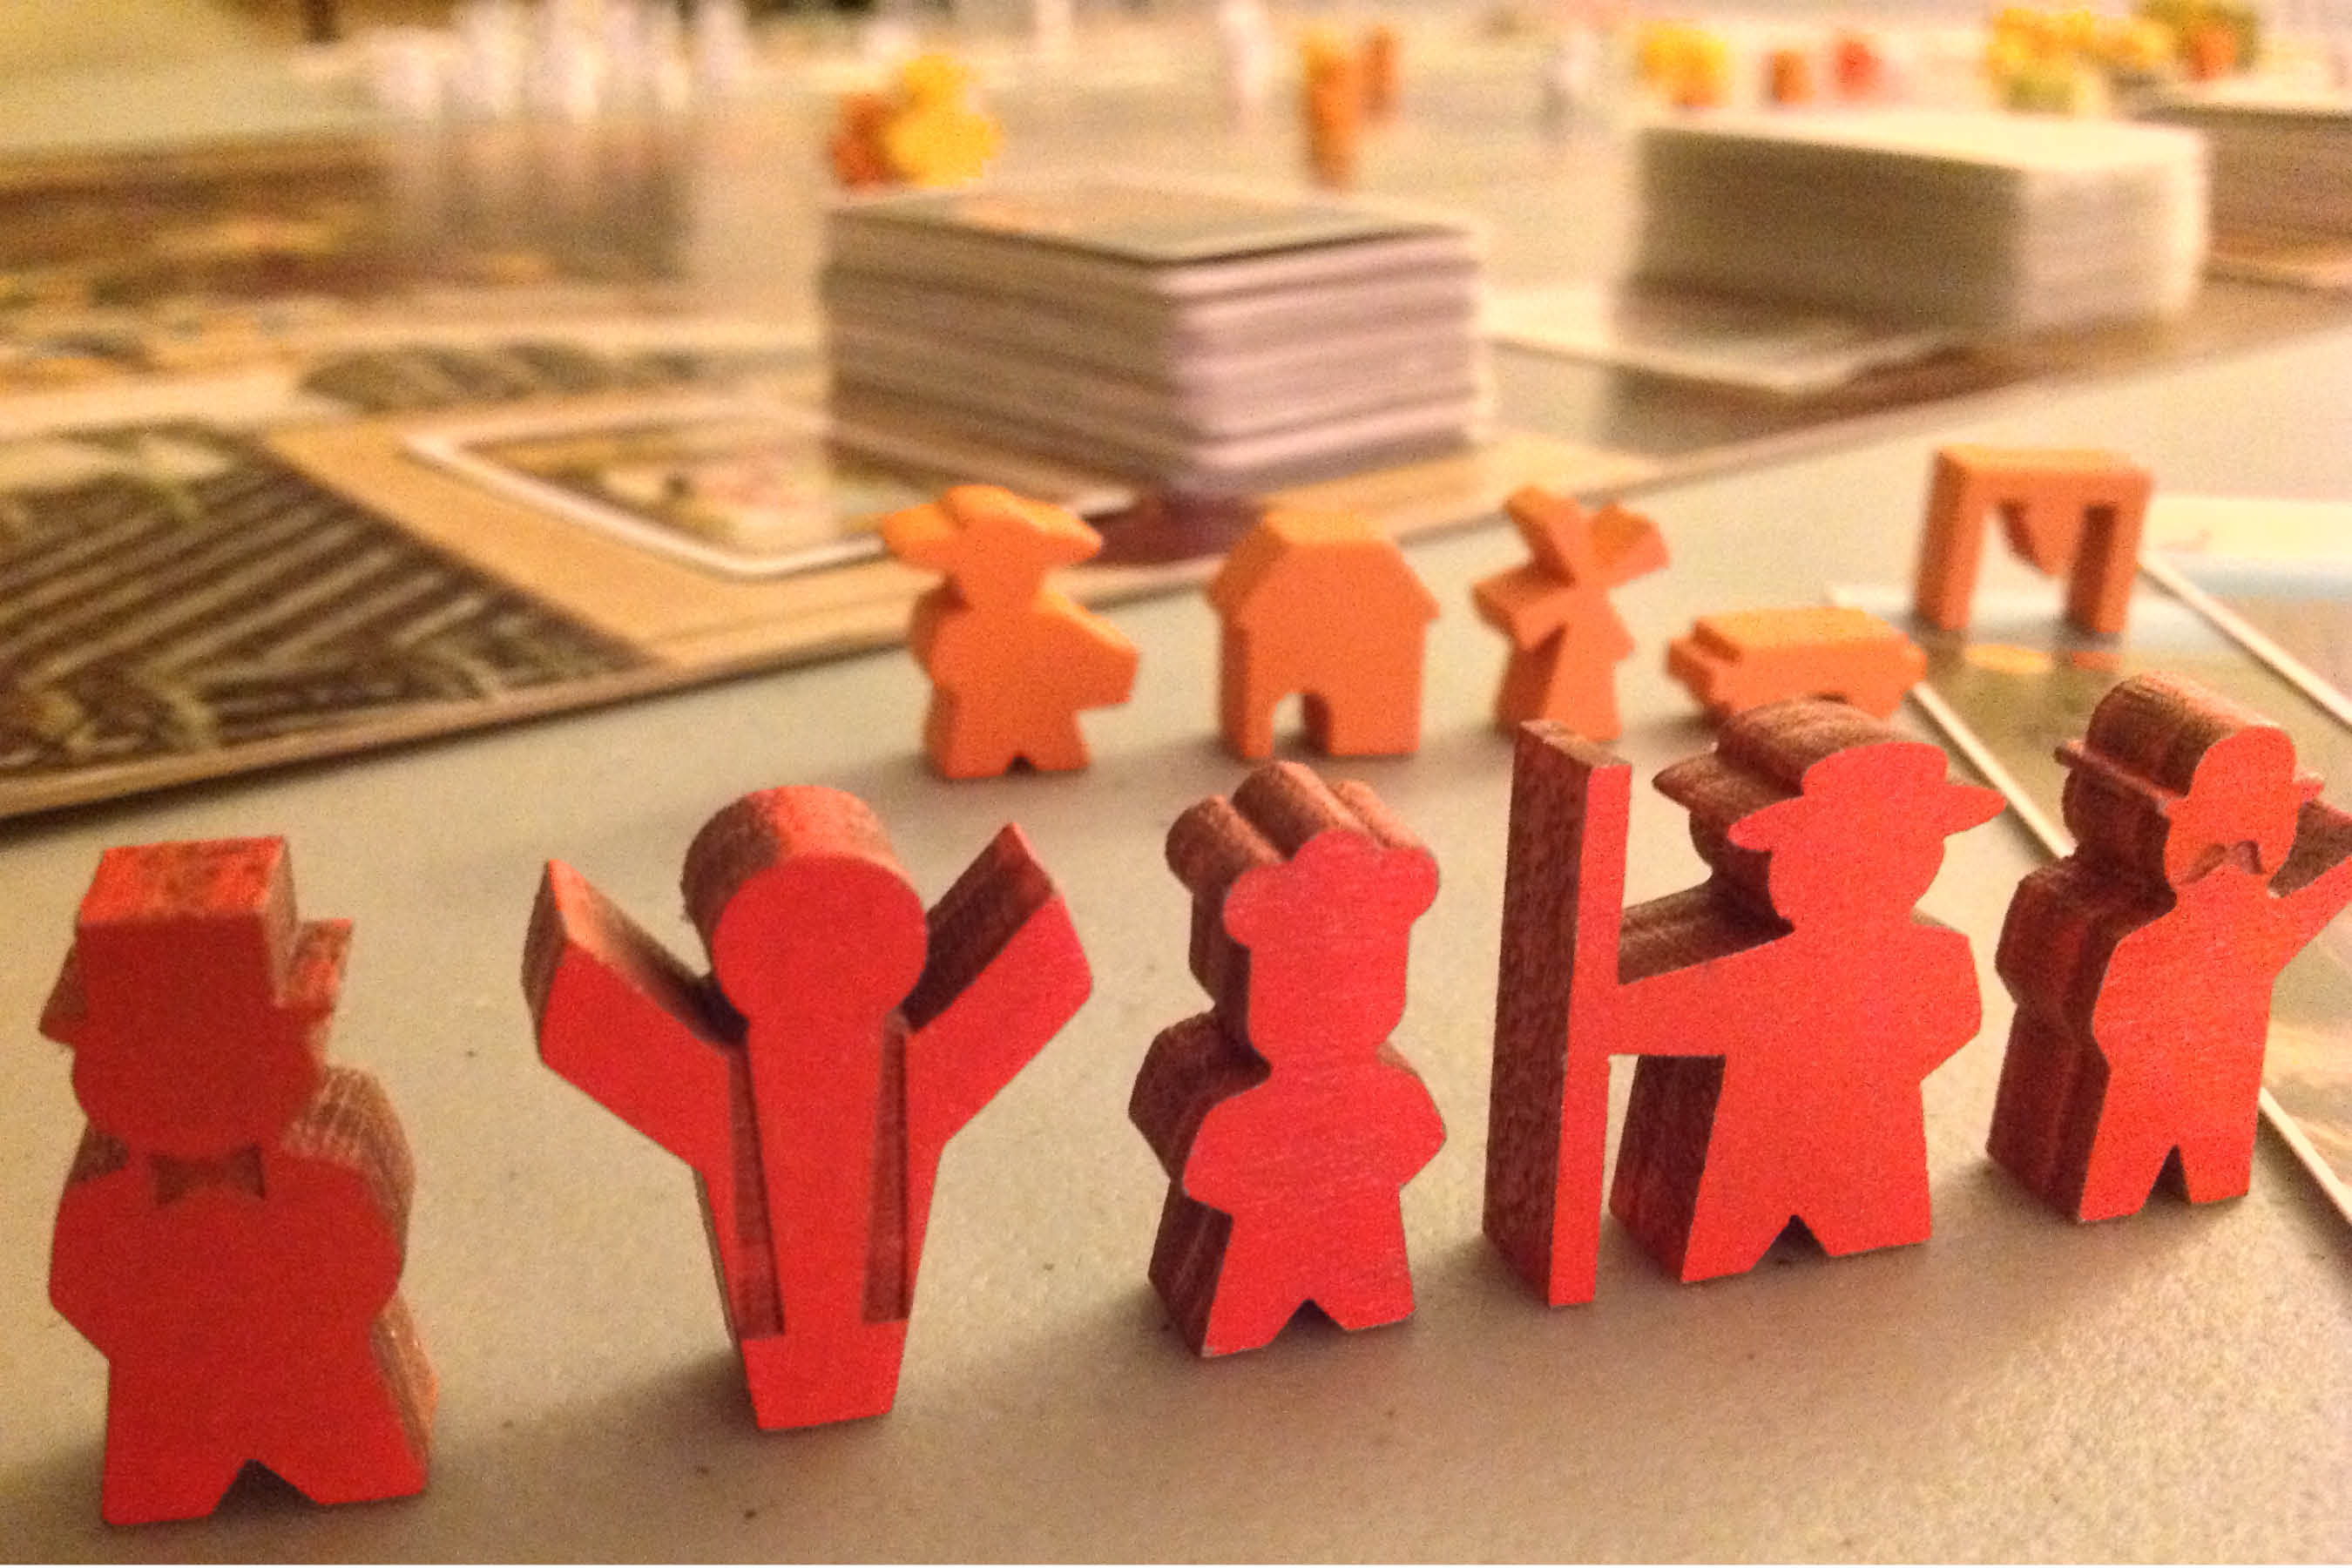 Wooden Board Game Meeple People (clearance)